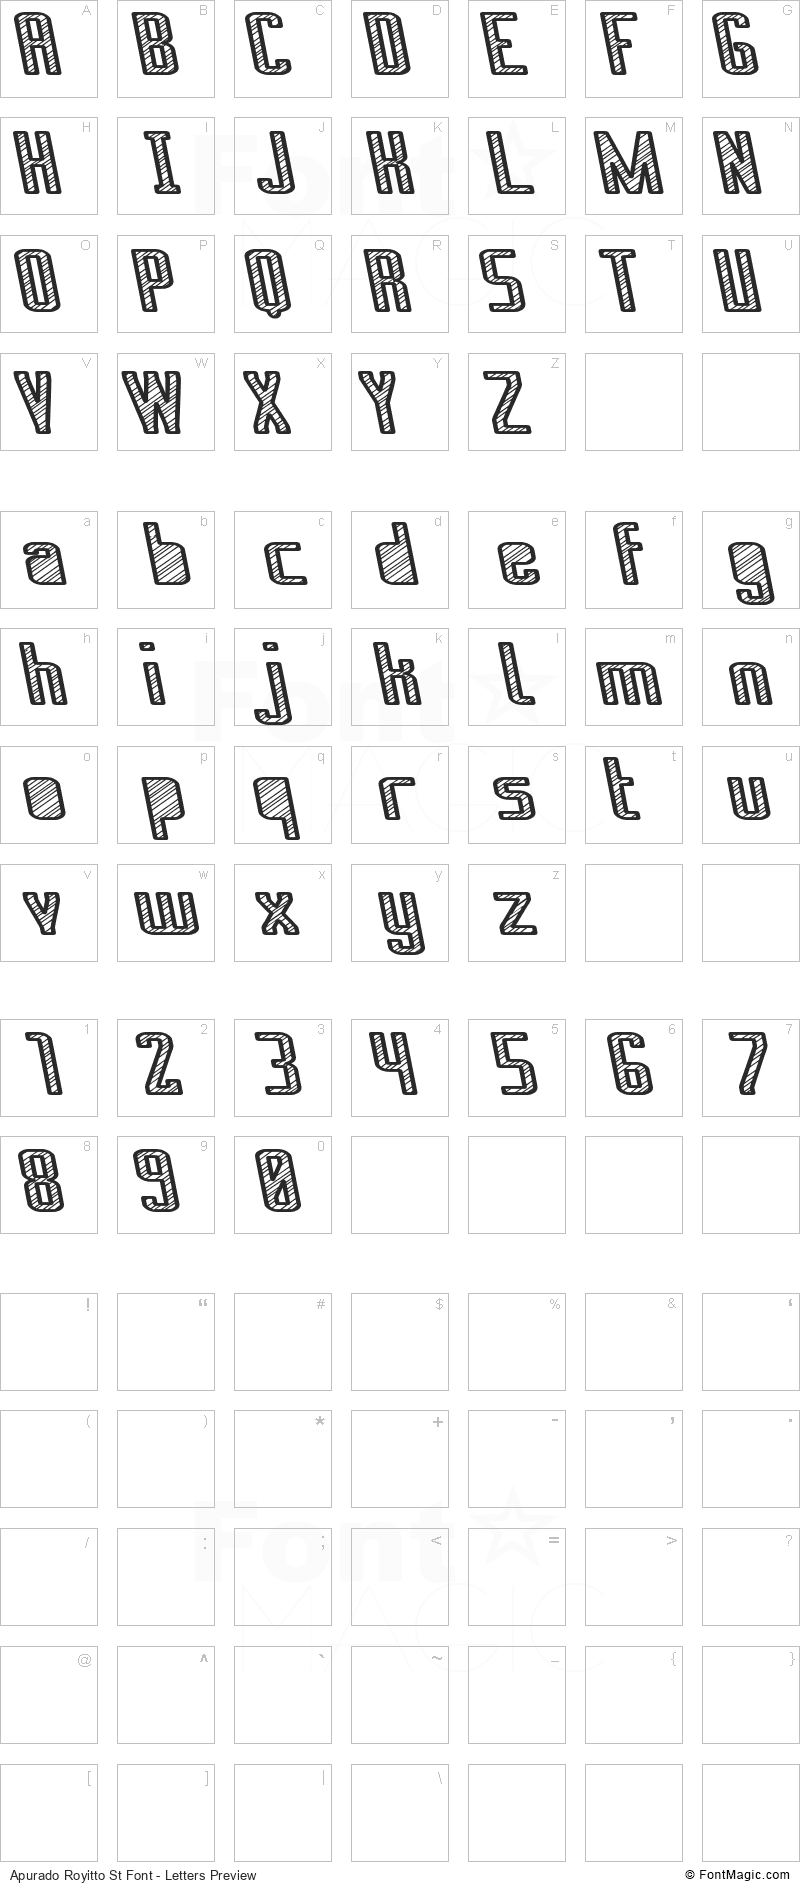 Apurado Royitto St Font - All Latters Preview Chart